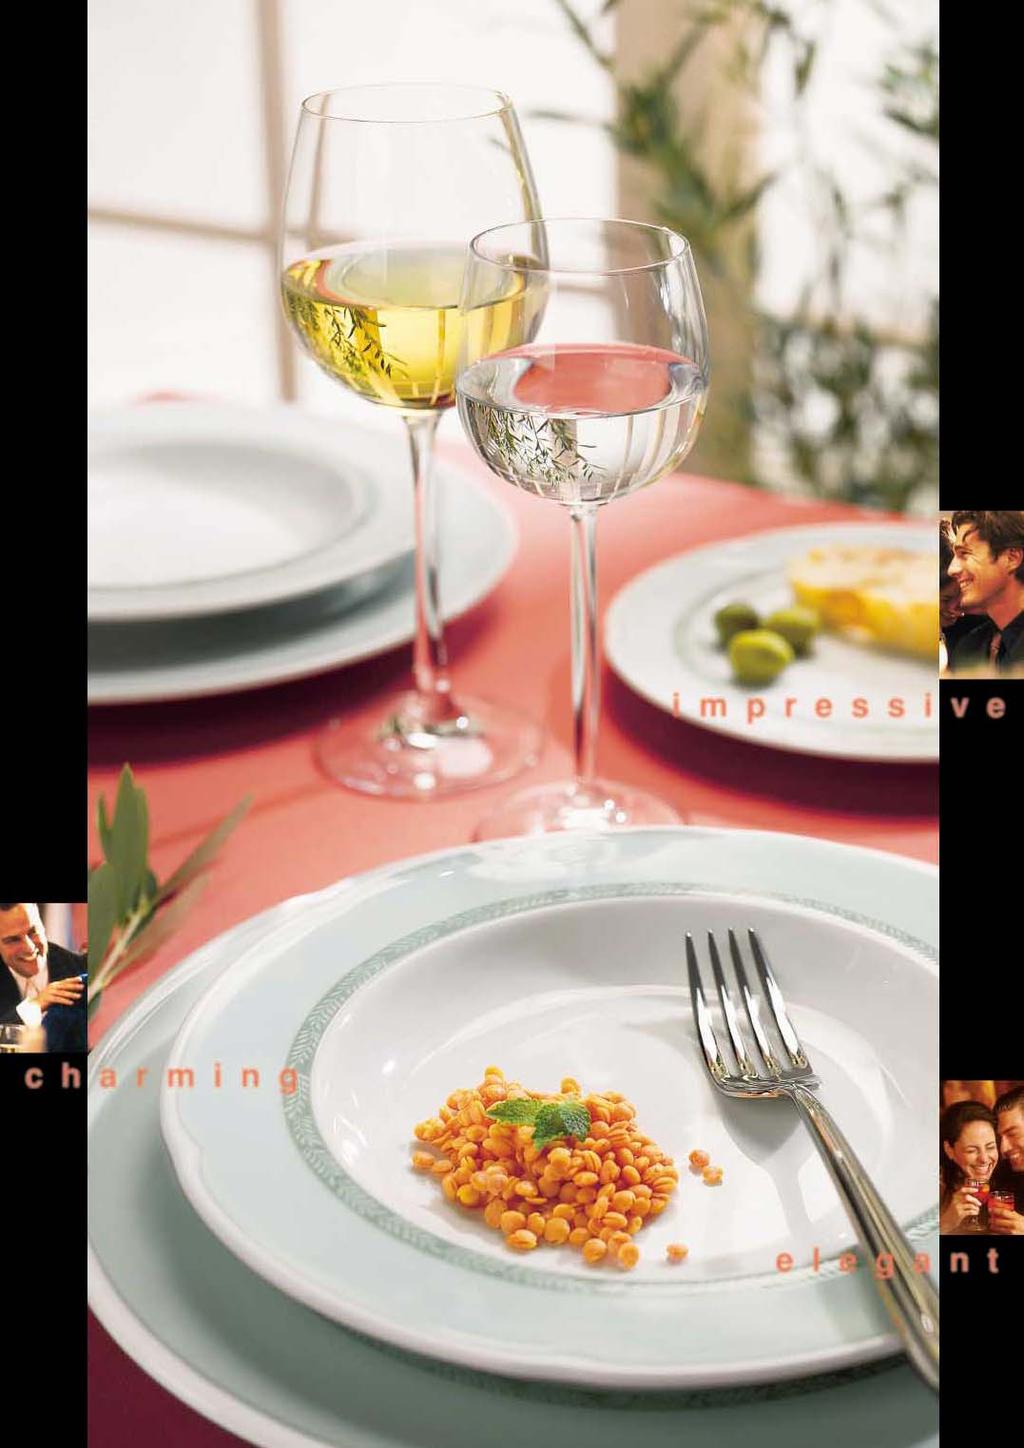 BAUSCHER. THE INVENTOR OF HOTEL PORCELAIN. FINESSE LIES IN THE HARMONY OF THE WHOLE. GALA Those who specialize achieve more. Bauscher has been manufacturing hotel porcelain since 1881. Nothing else.